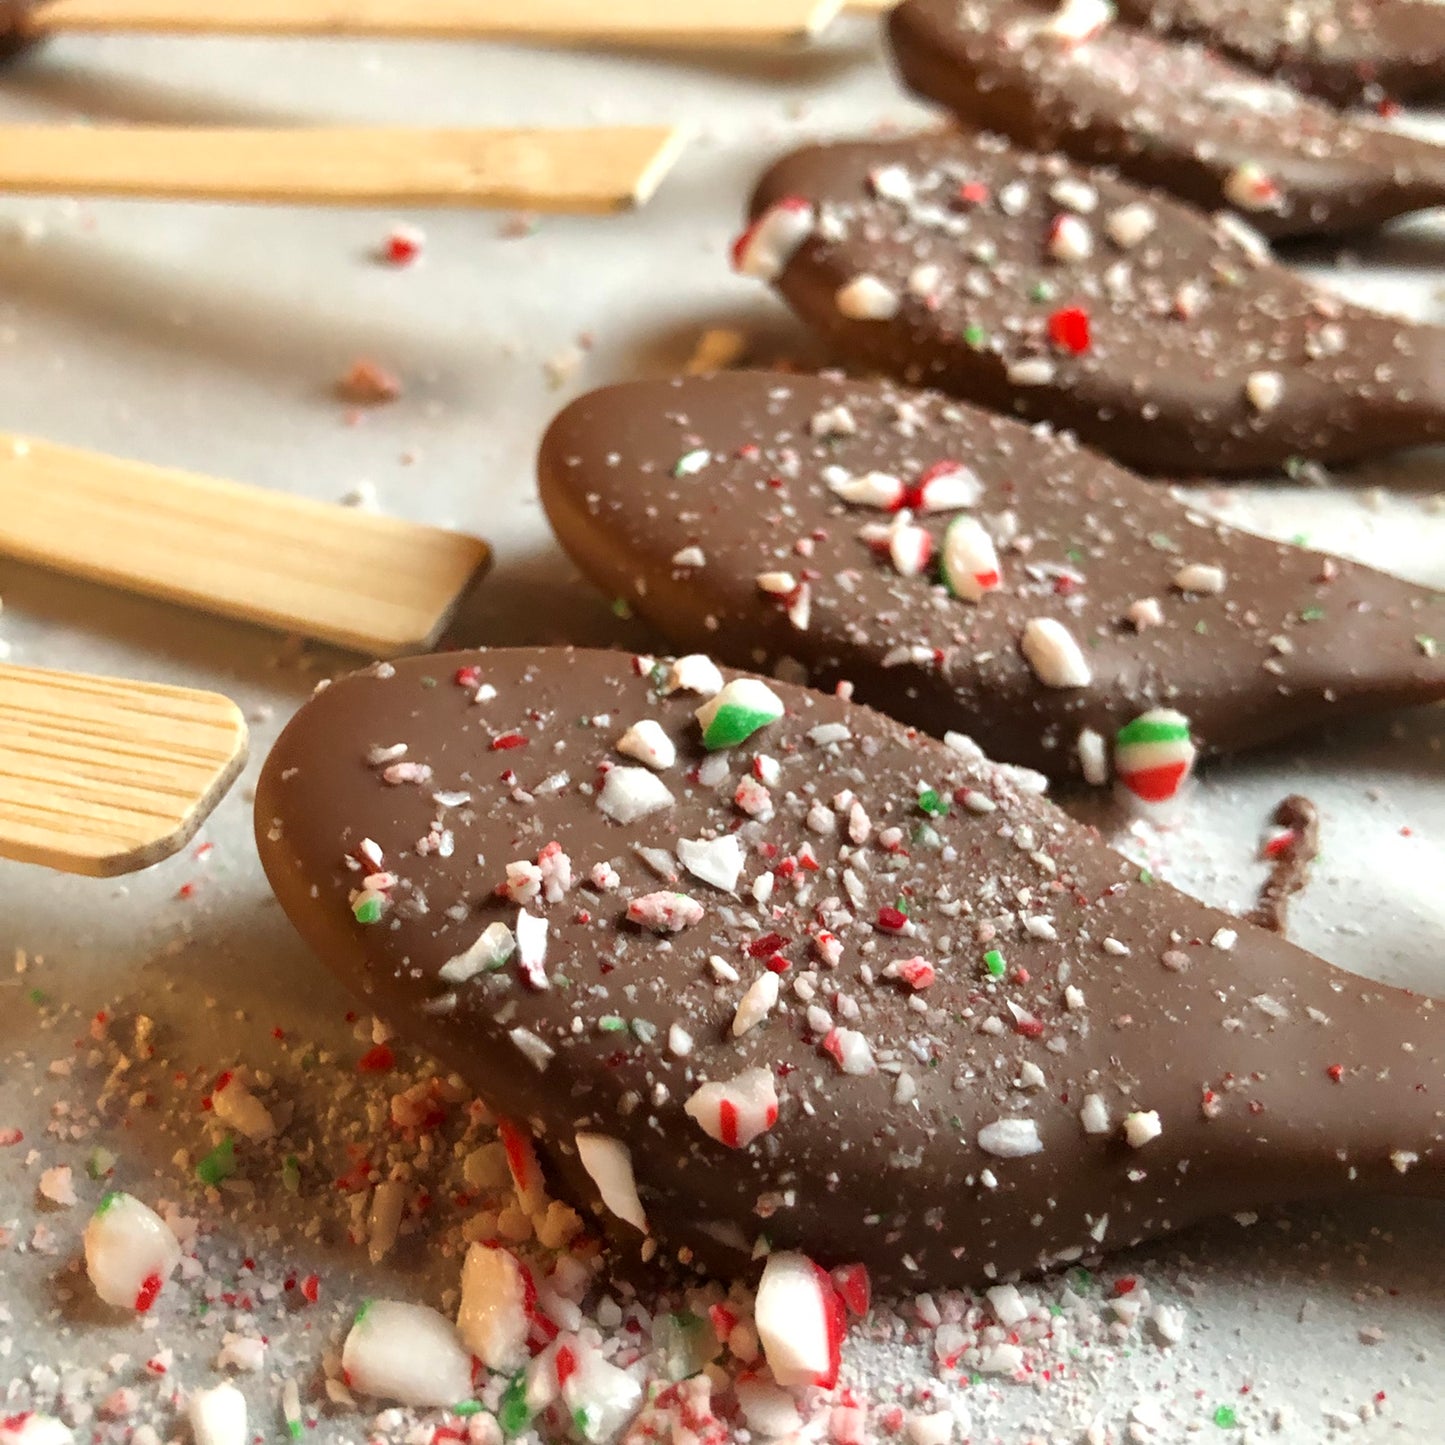 Milk chocolate covered spoons - Assorted flavours